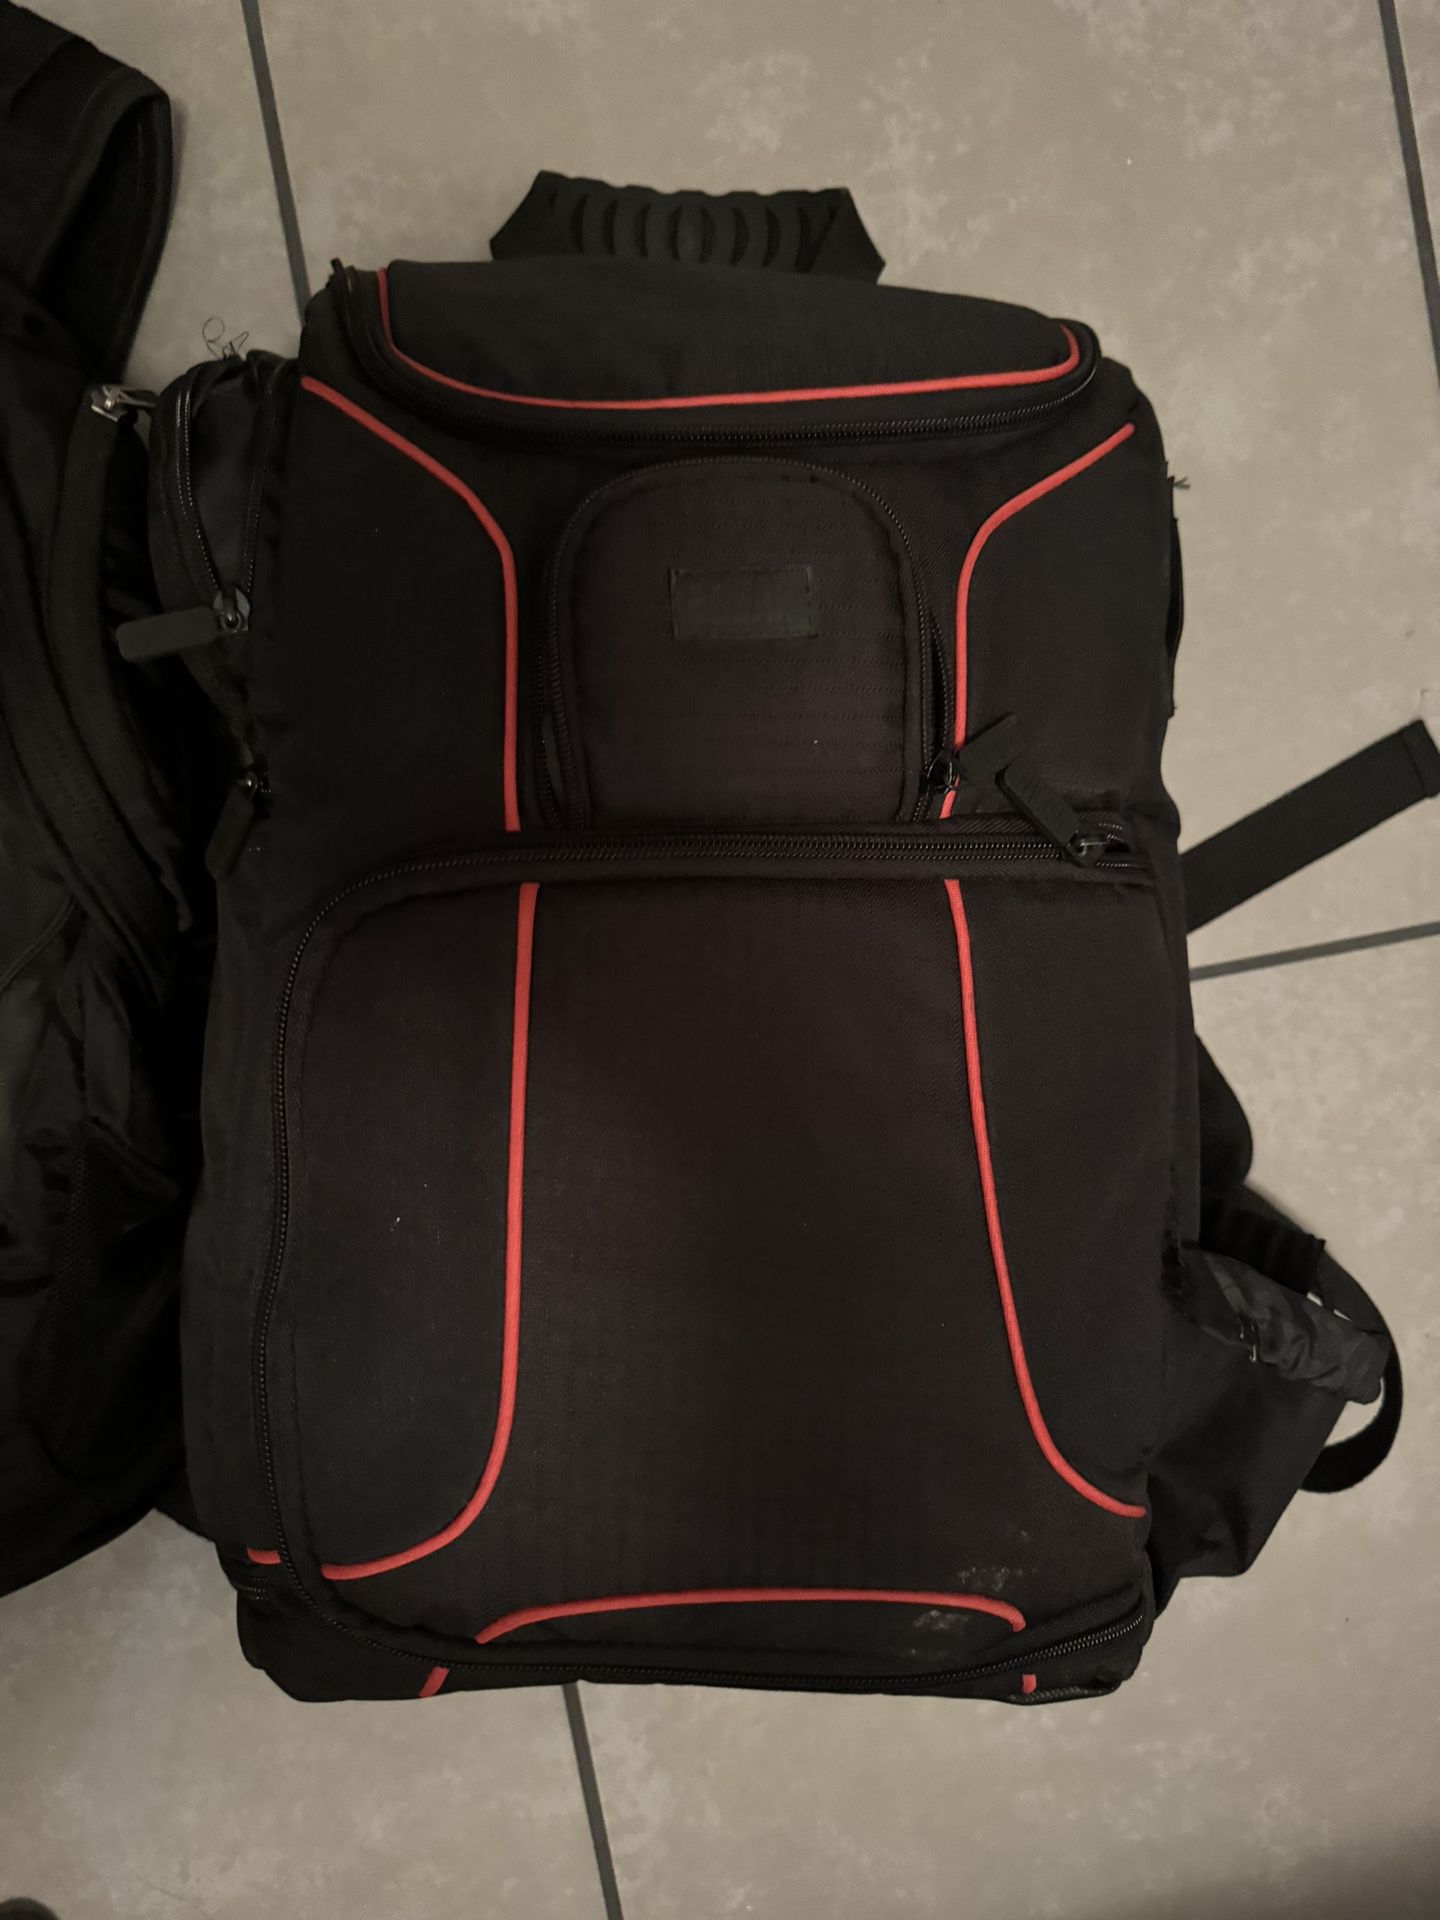 OGIO LAPTOP BACKPACK AND CAMERA BACKPACK